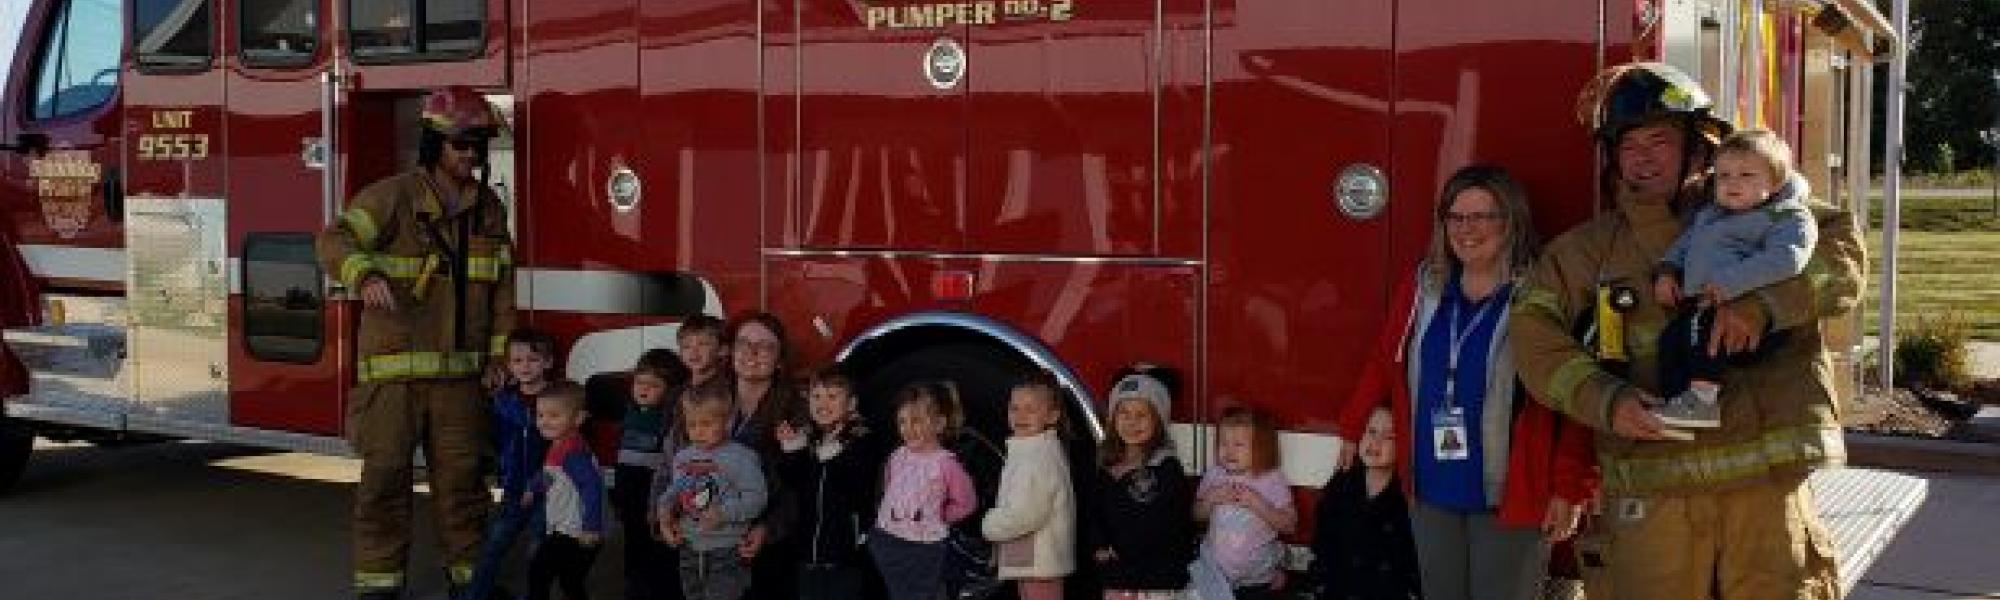 Childcare Provider Field Trip with local Fire Department